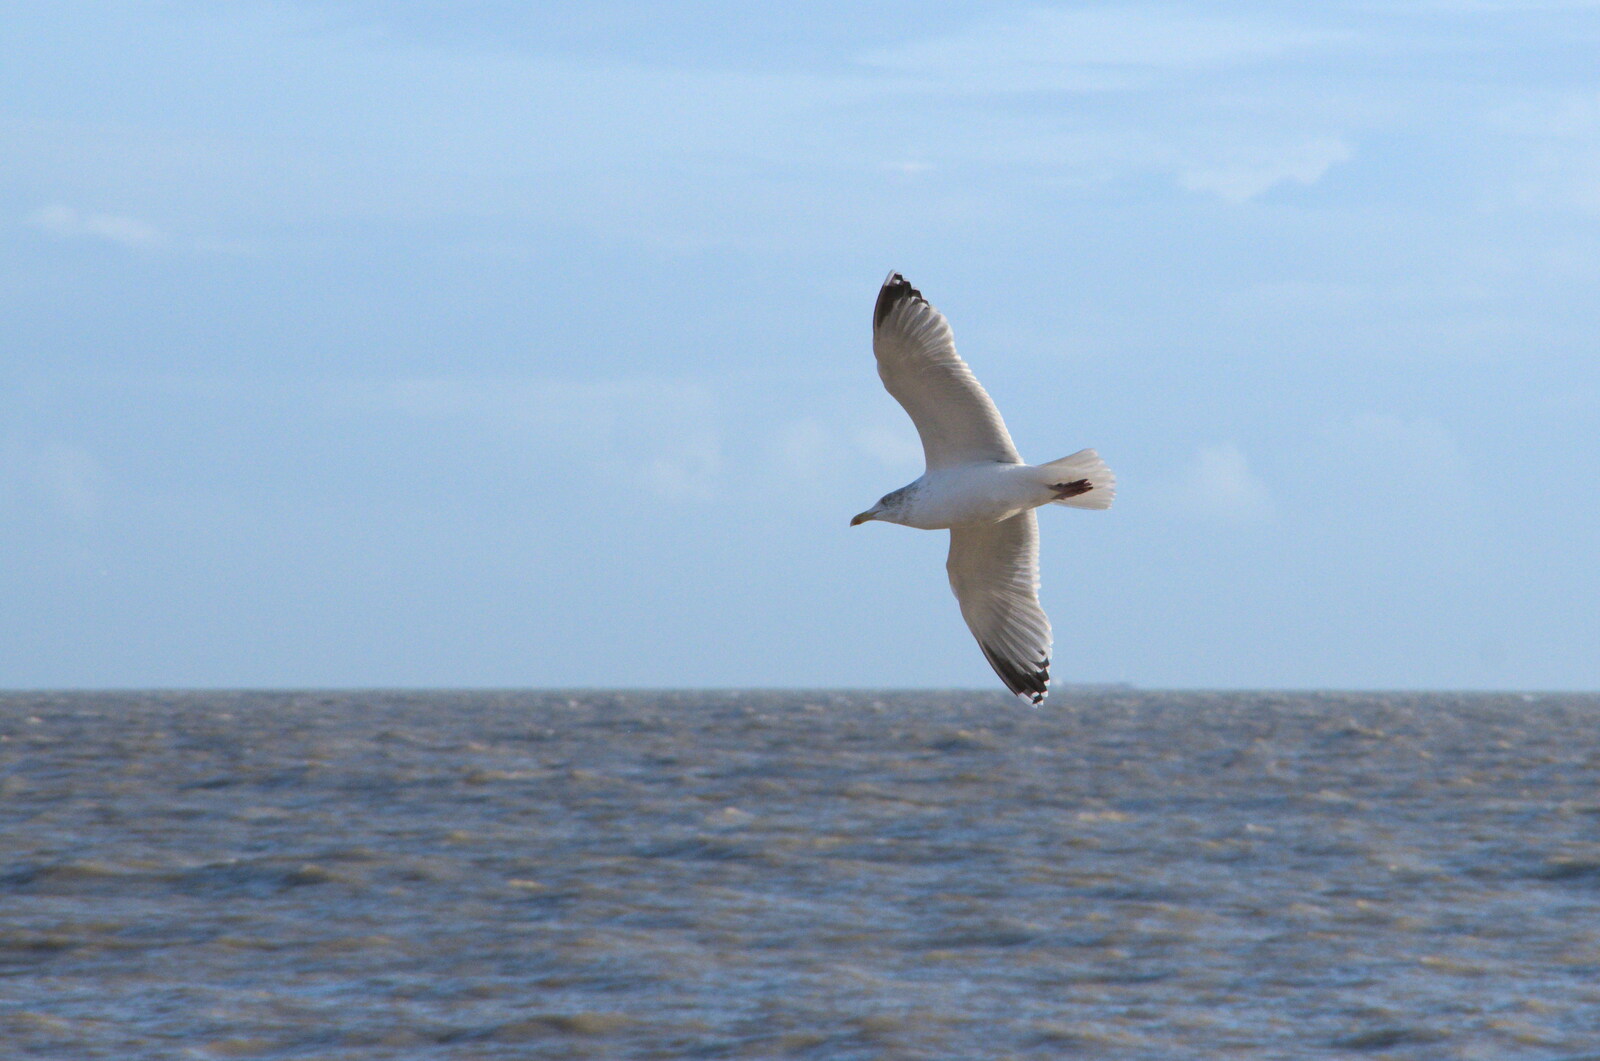 A seagull whirls around from A Return to the Beach, Southwold, Suffolk - 20th December 2020